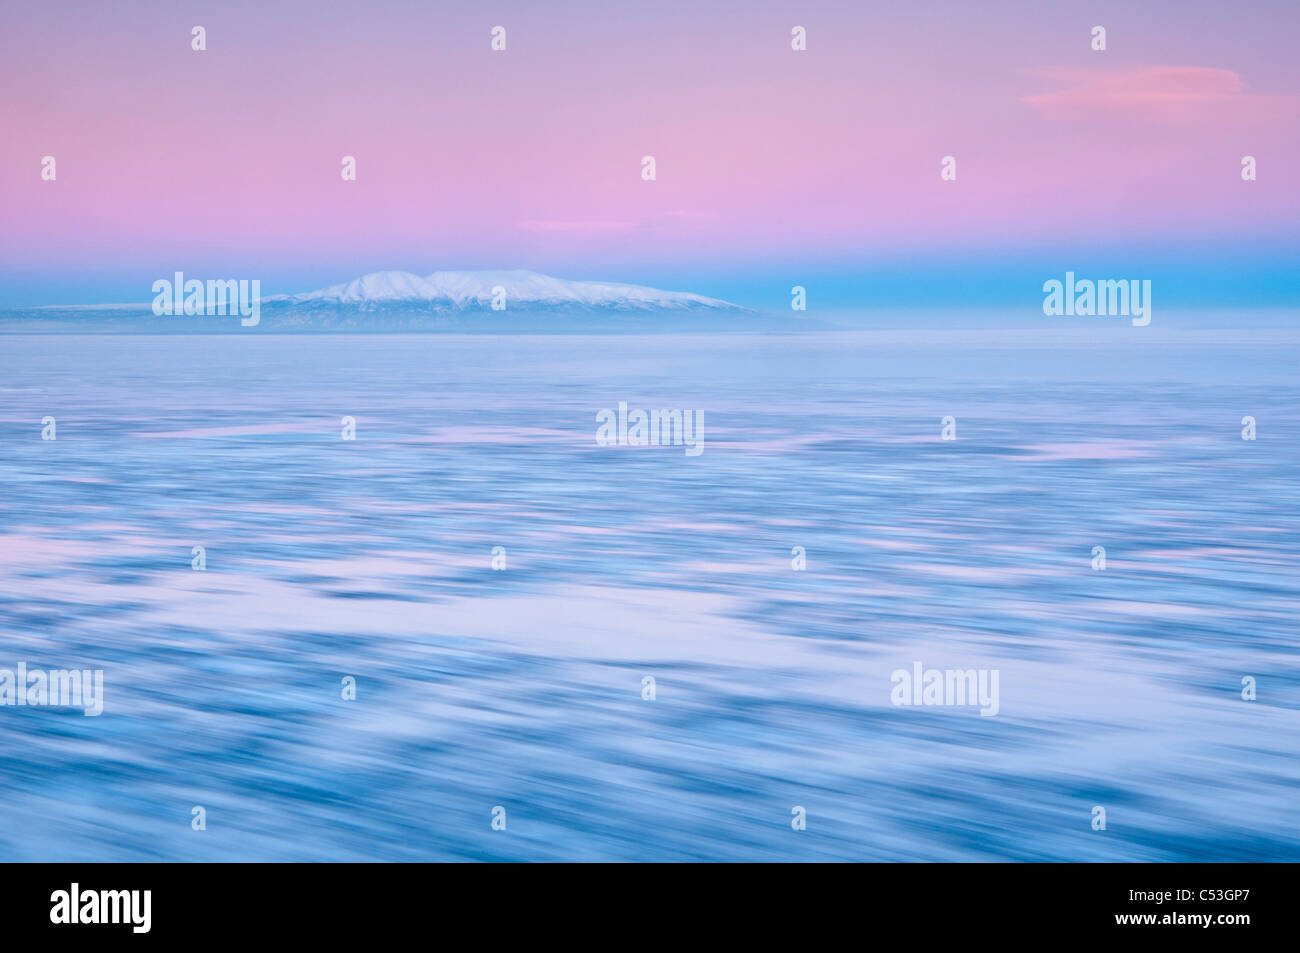 Blurred motion view of outgoing tide and ice at sunrise with Mt. Susitna in the background, Point Woronzof, Anchorage, Alaska Stock Photo